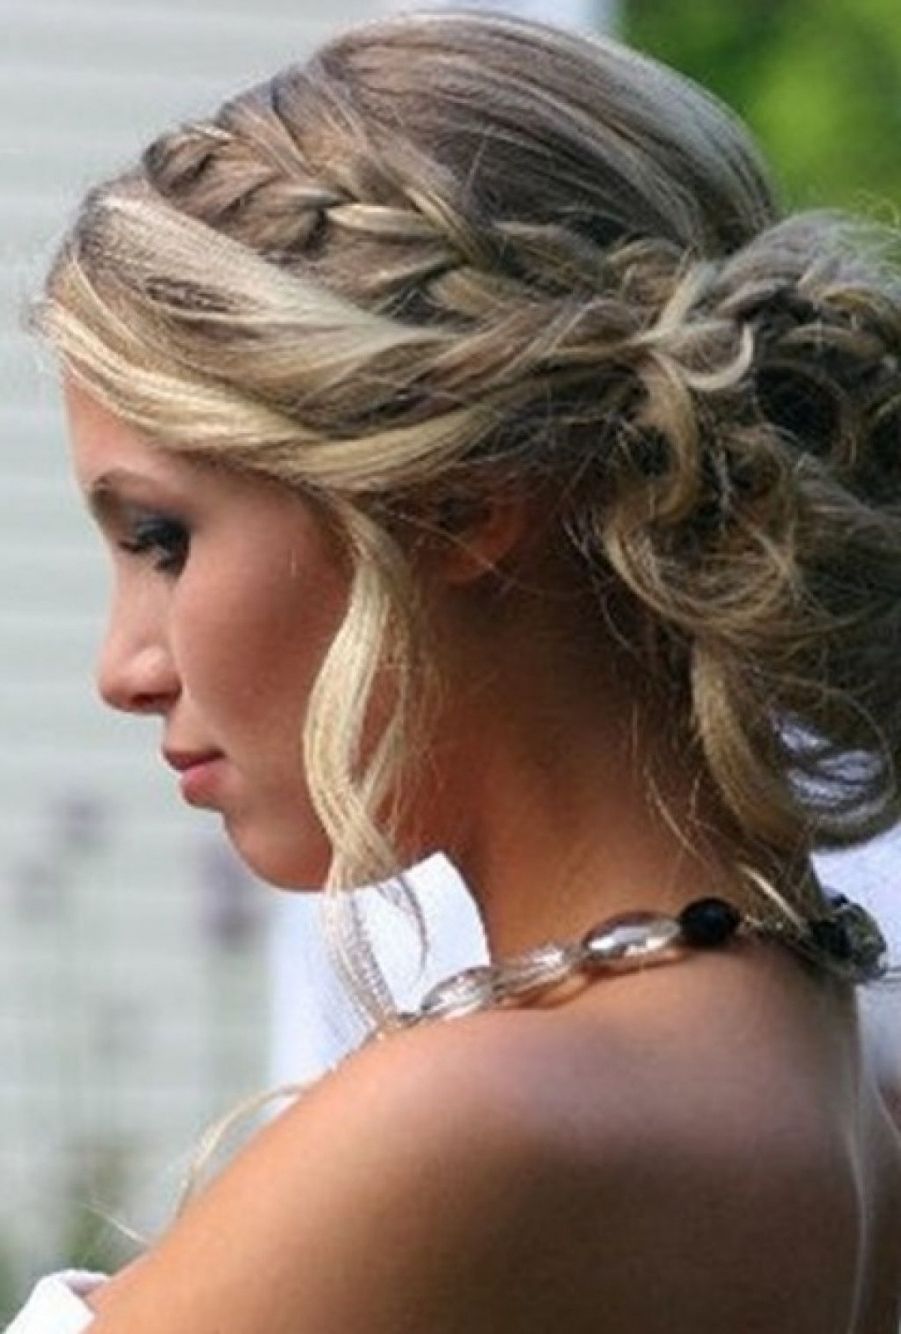 Photo: Prom Hairstyles Tumblr Thick Shoulder Length Hair Wedding With Well Known Wedding Hairstyles For Shoulder Length Thick Hair (View 1 of 15)